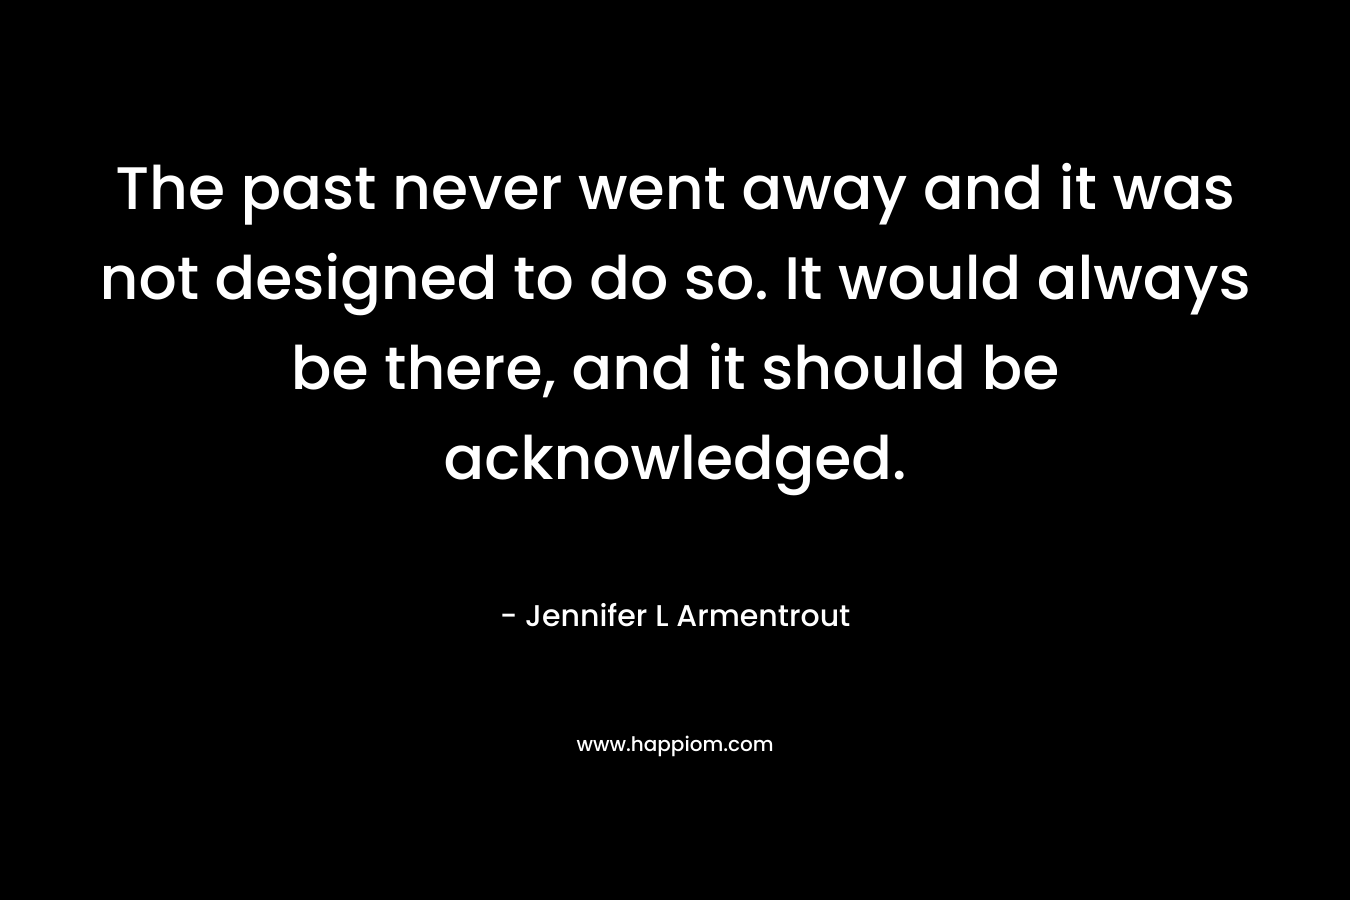 The past never went away and it was not designed to do so. It would always be there, and it should be acknowledged.